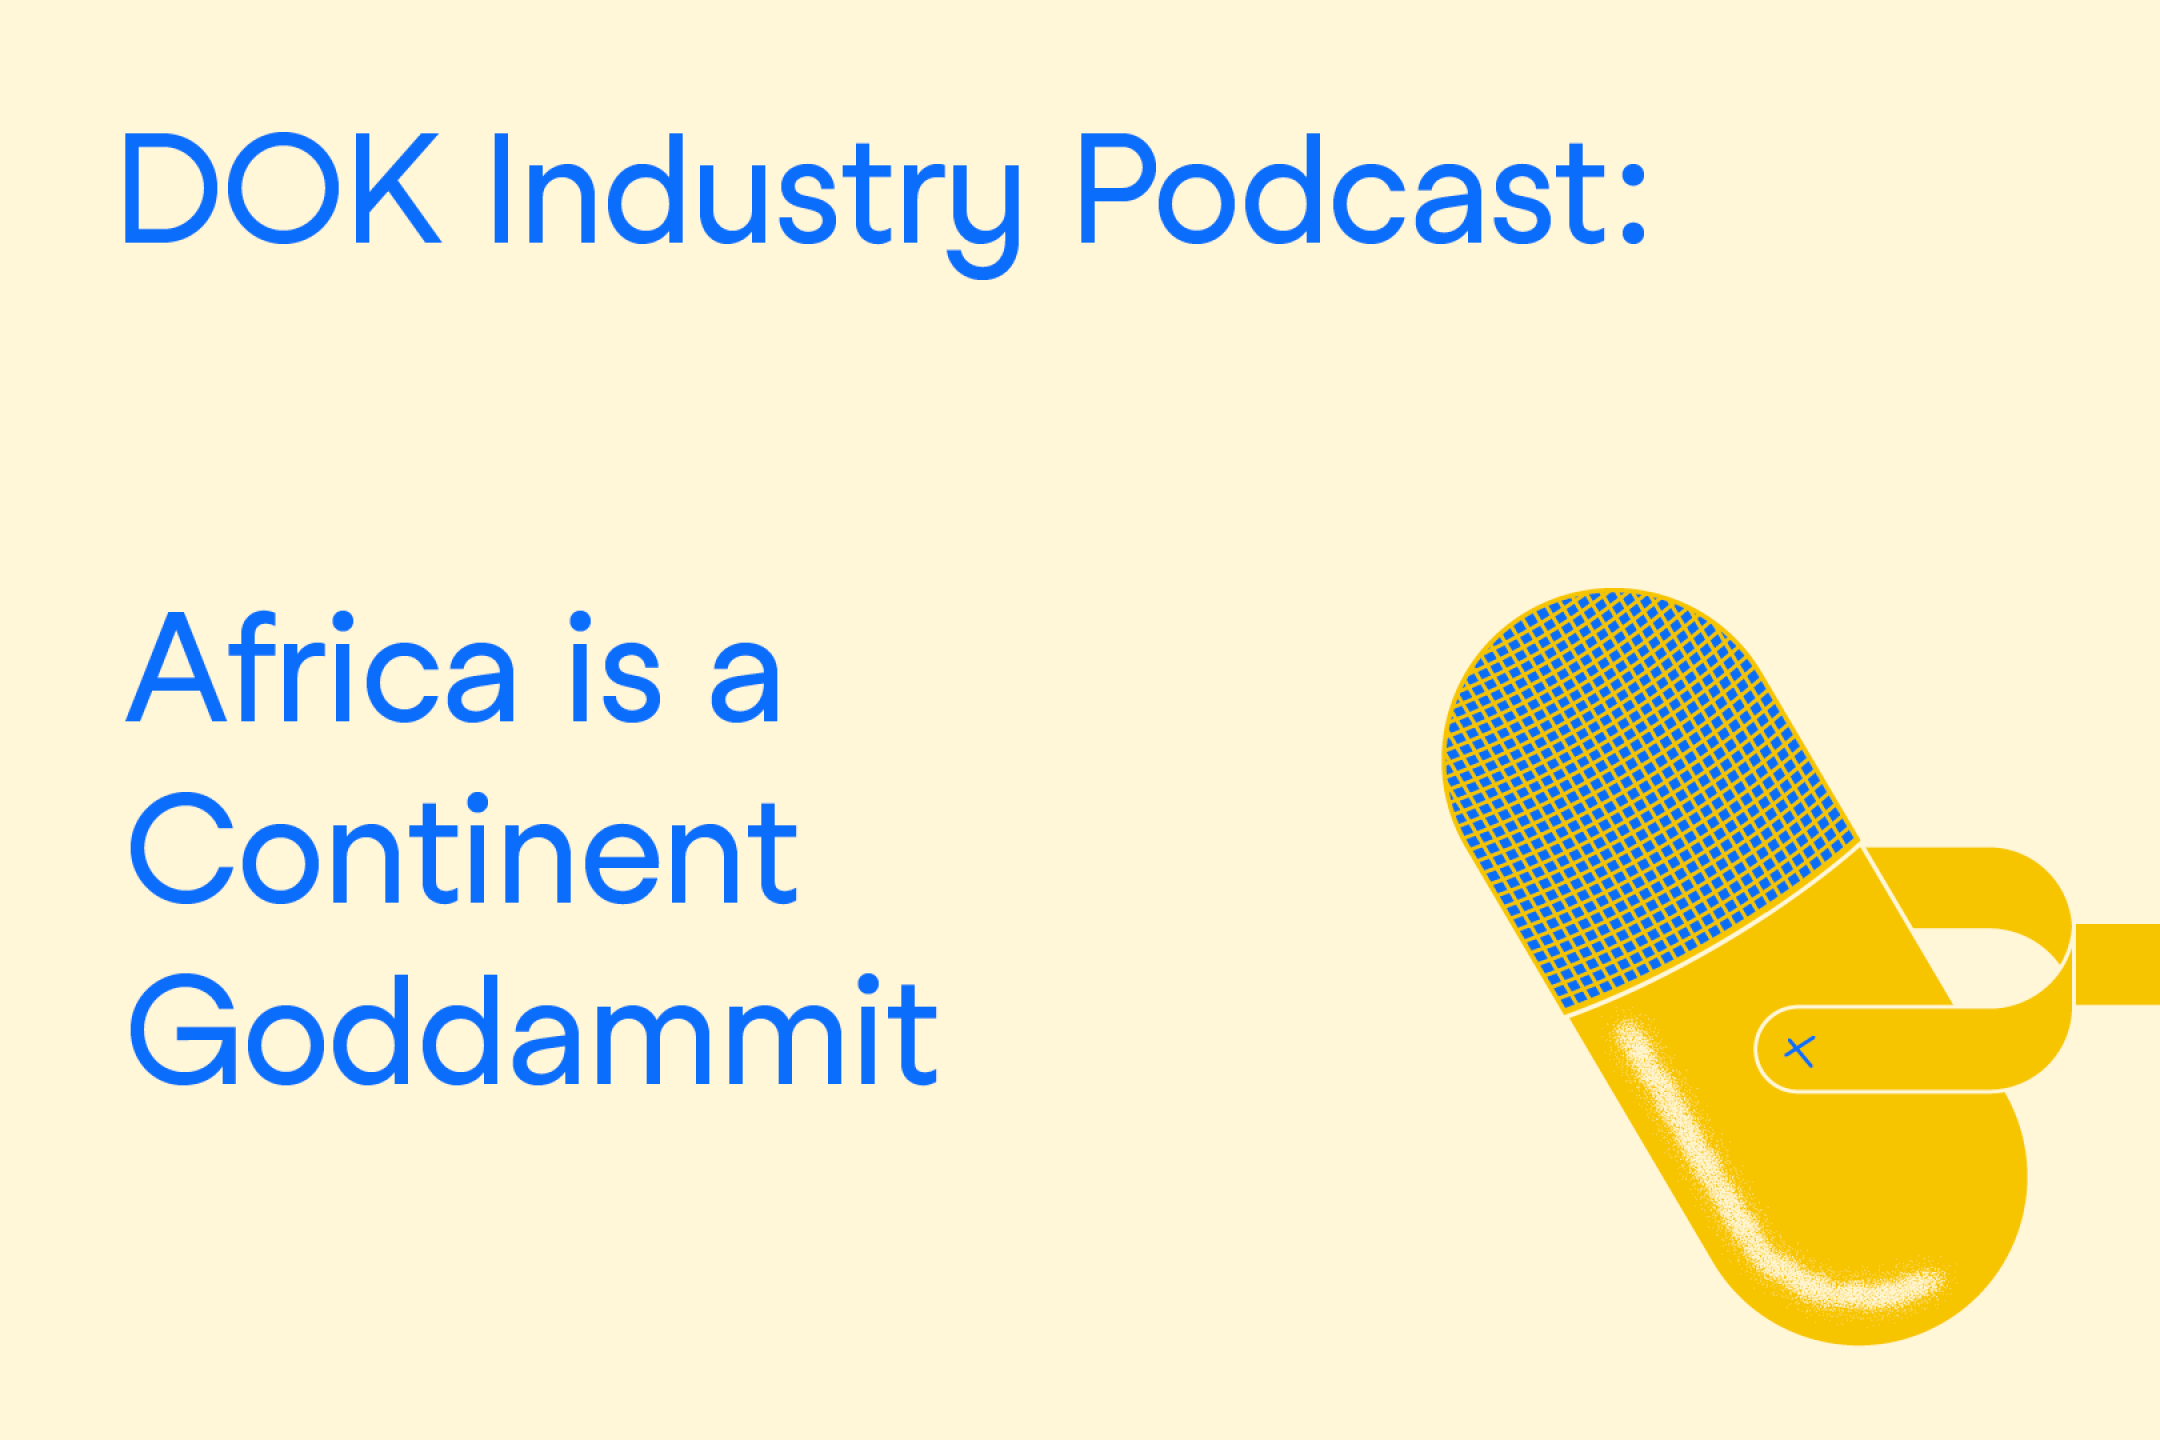 A text graphic with blue letters on a yellow background. At the right the illustration of a microphone. At the left the text: "DOK Industry Podcast: Africa is a Continent Goddammit”